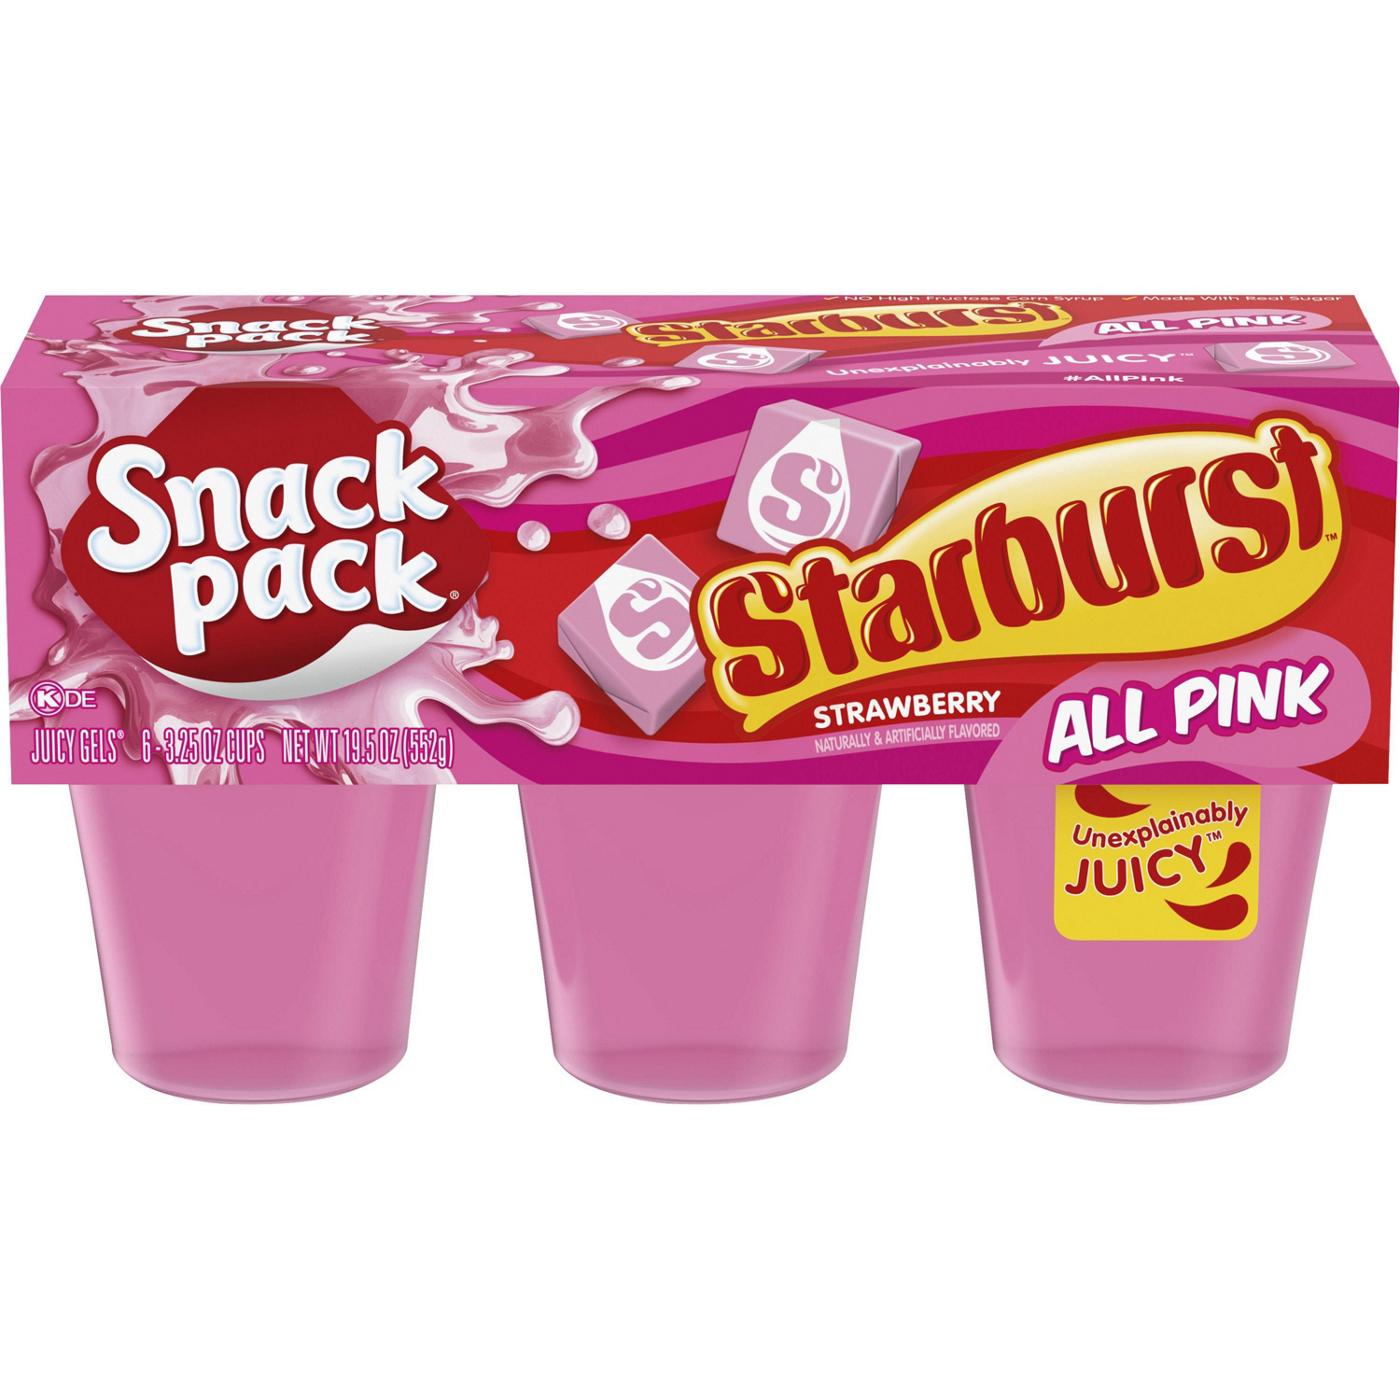 Snack Pack Starburst Strawberry Pudding Cups; image 1 of 2